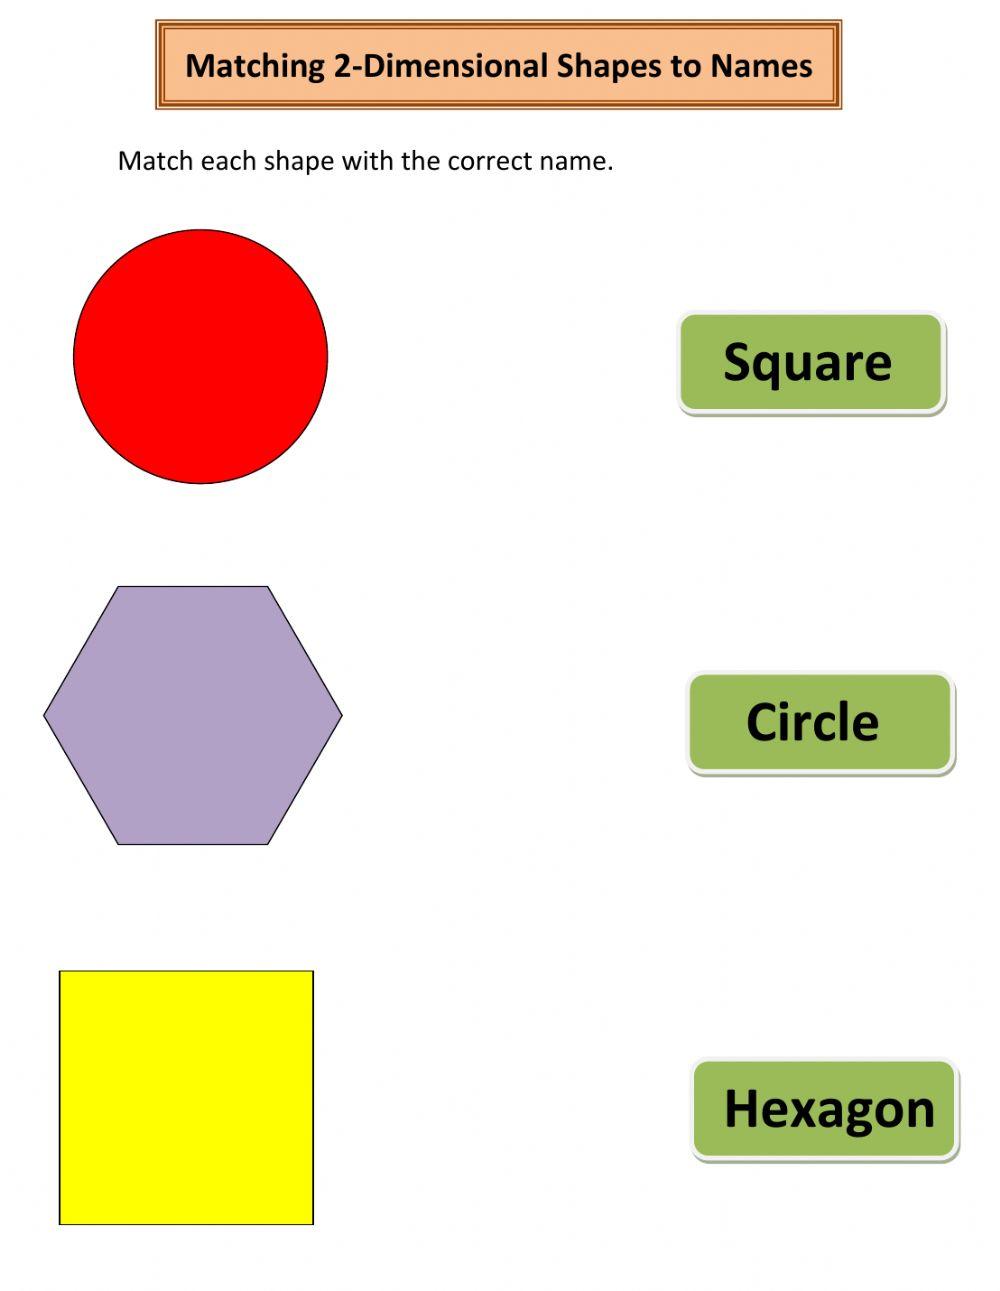 Matching 2-Dimensional Shapes to Names